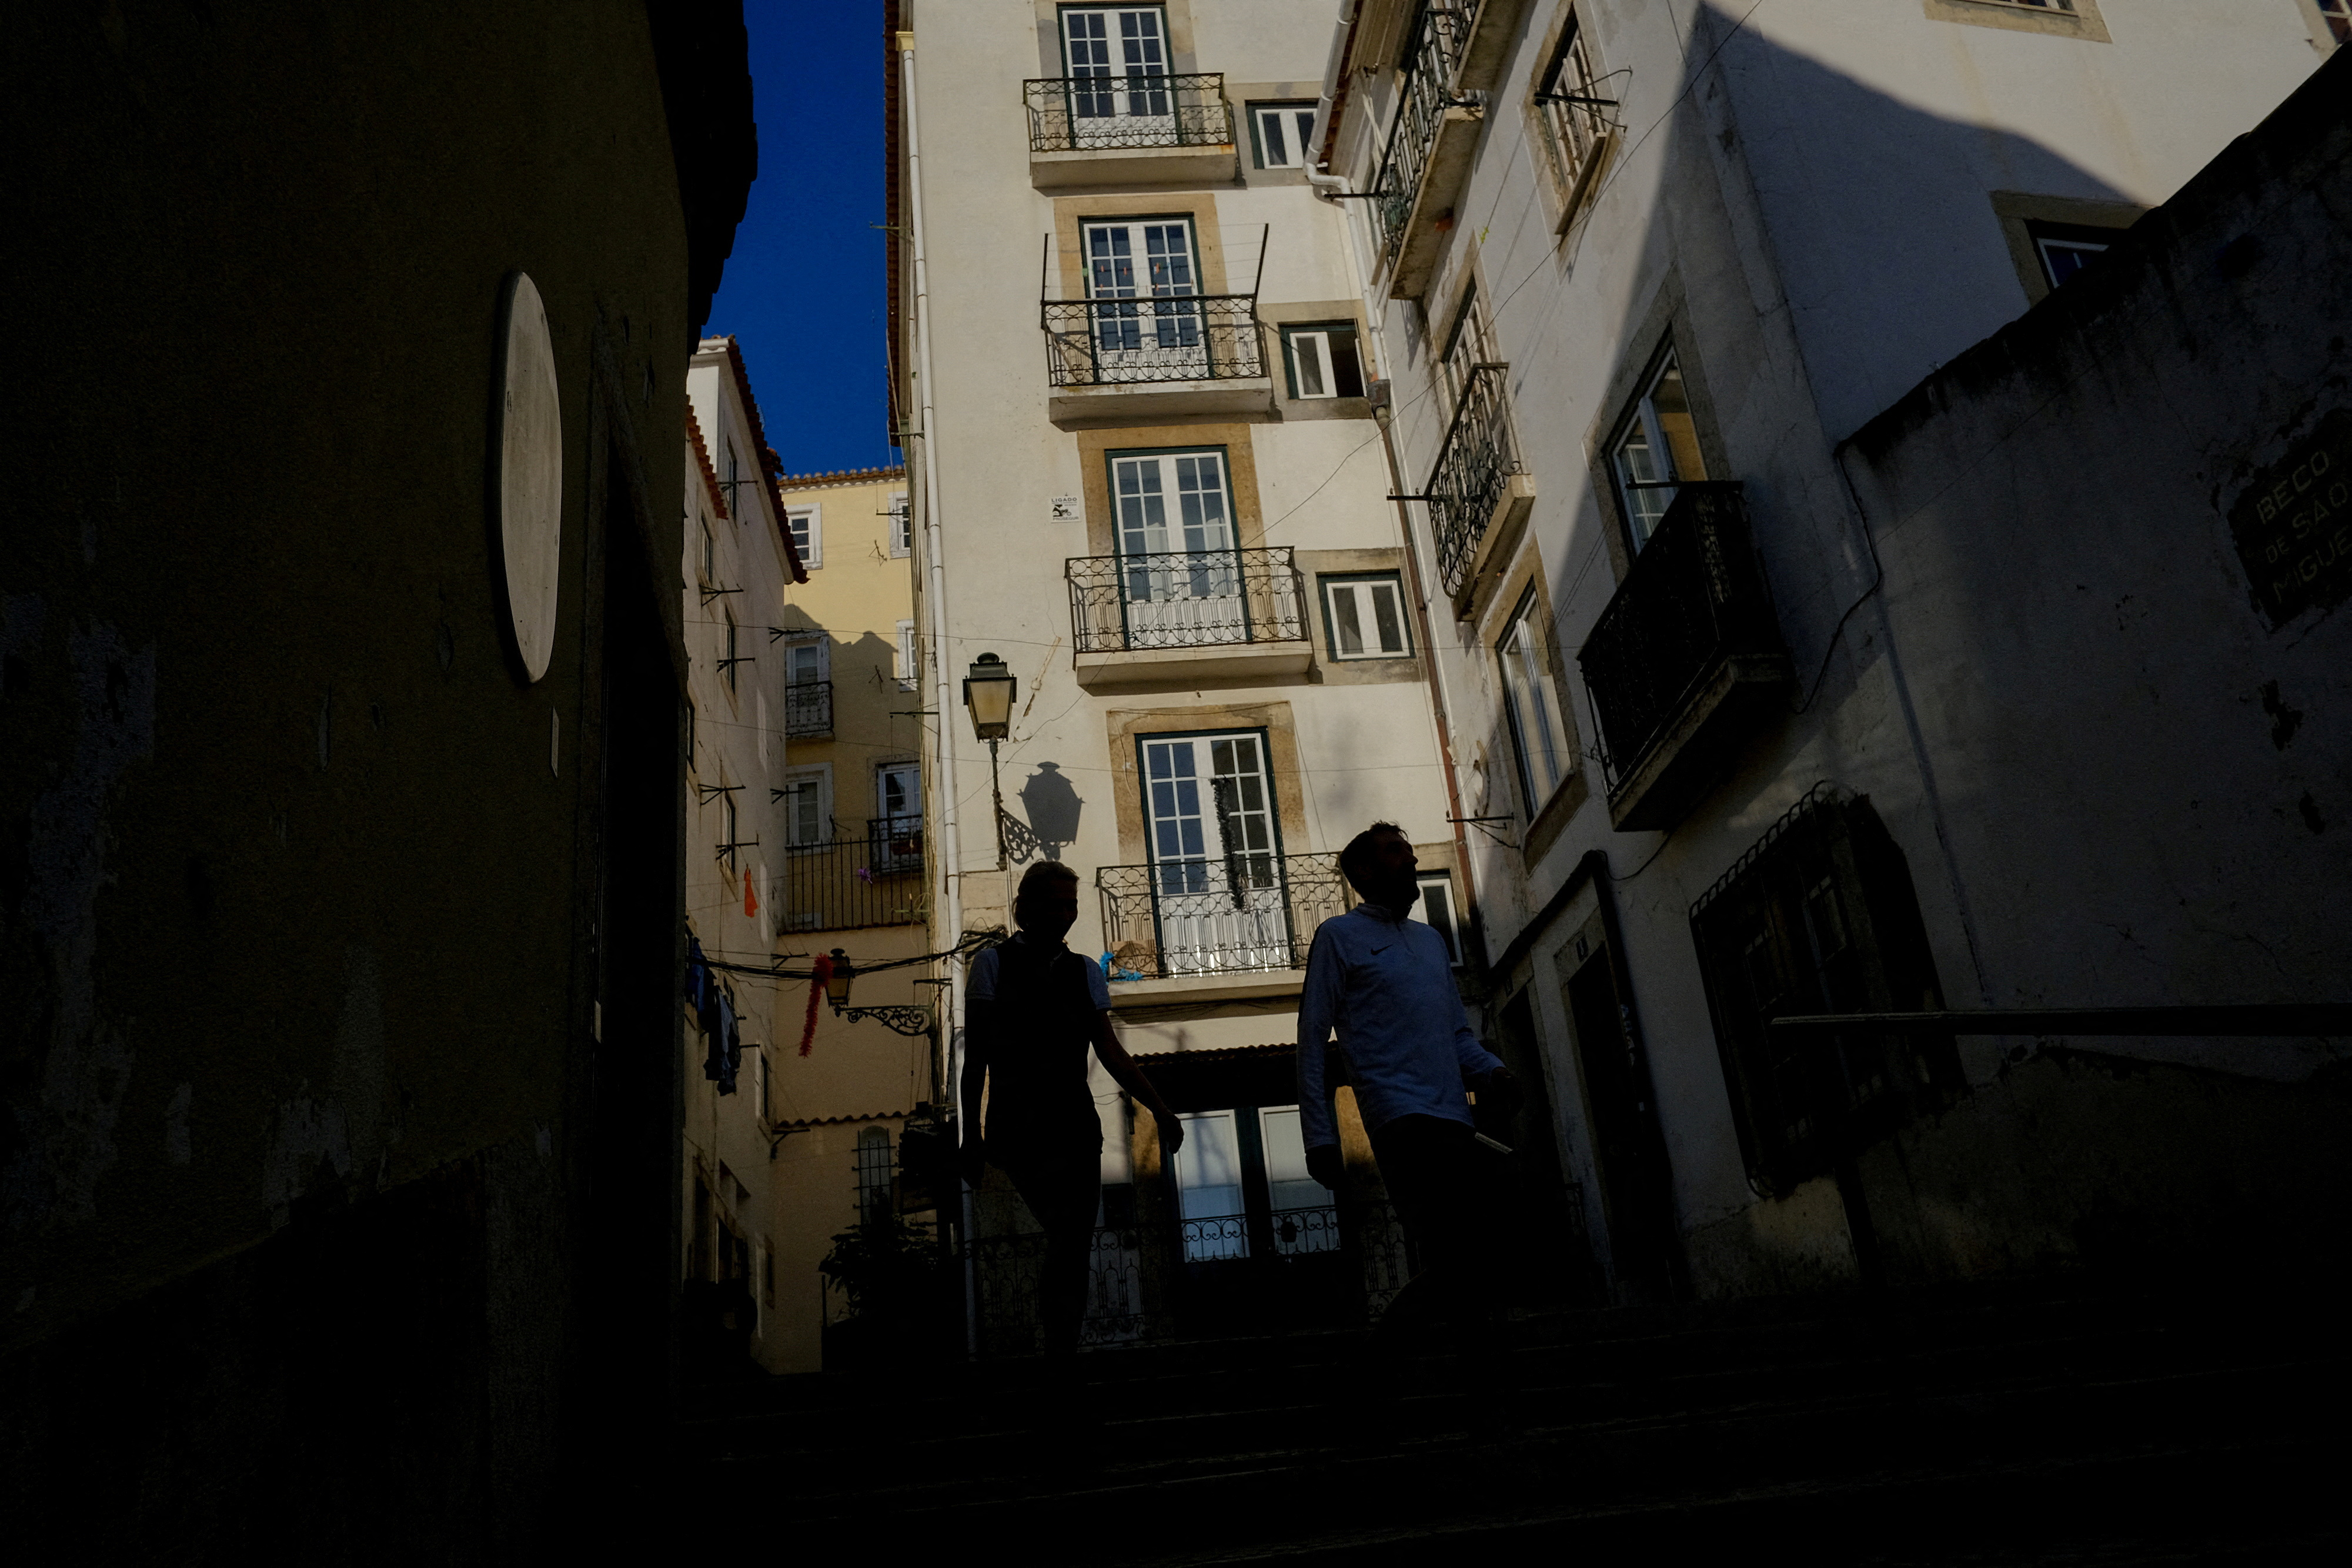 Portugal extends tax breaks for foreign residents despite house price  concerns